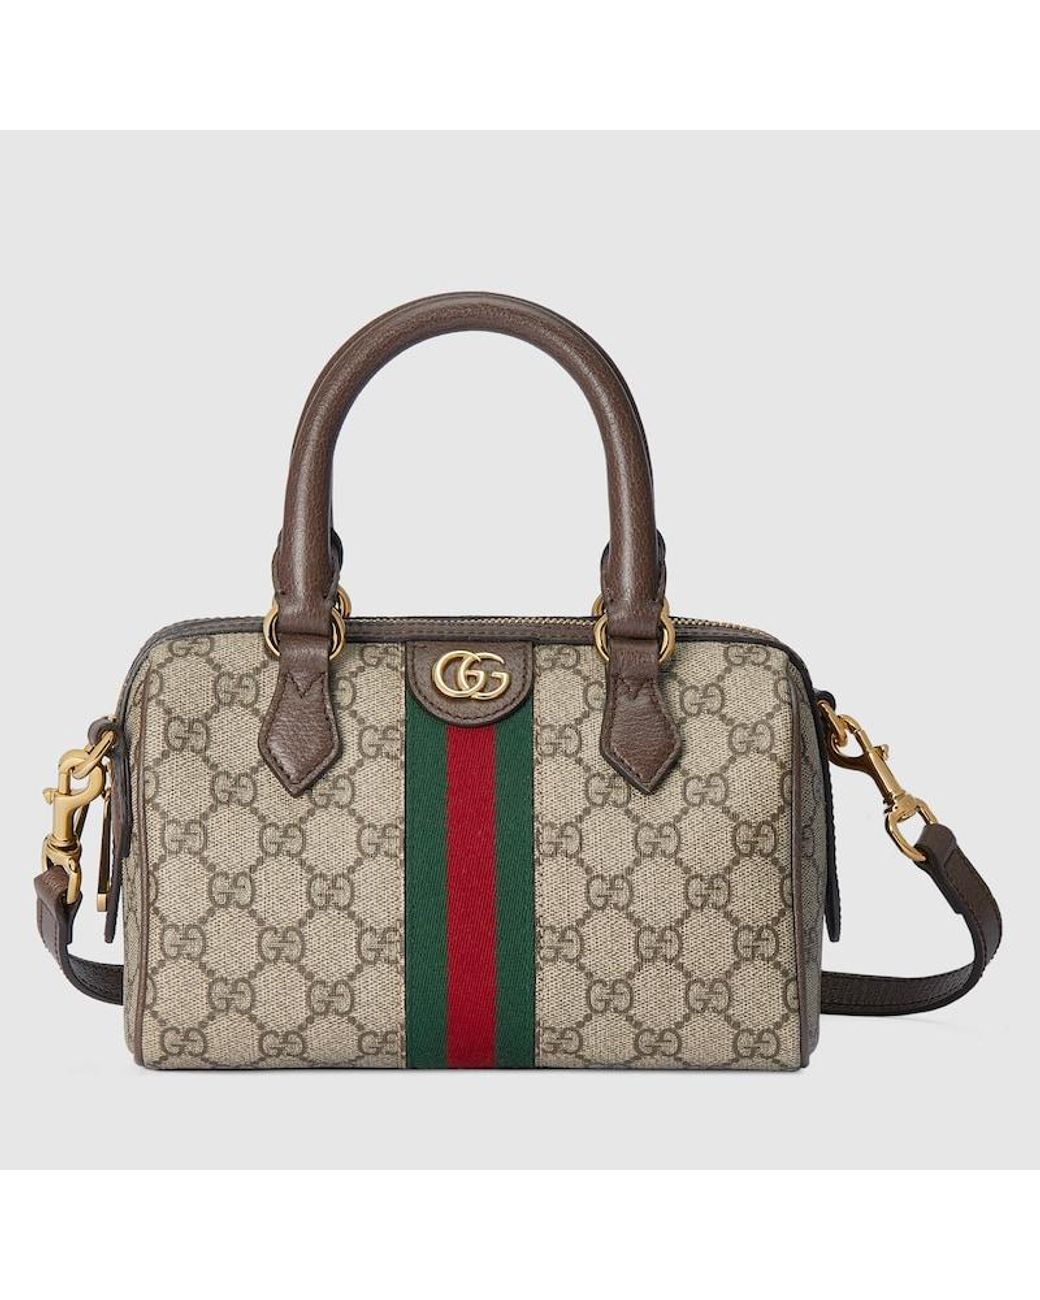 Gucci Ophidia GG Mini Top Handle Bag in Brown | Lyst UK